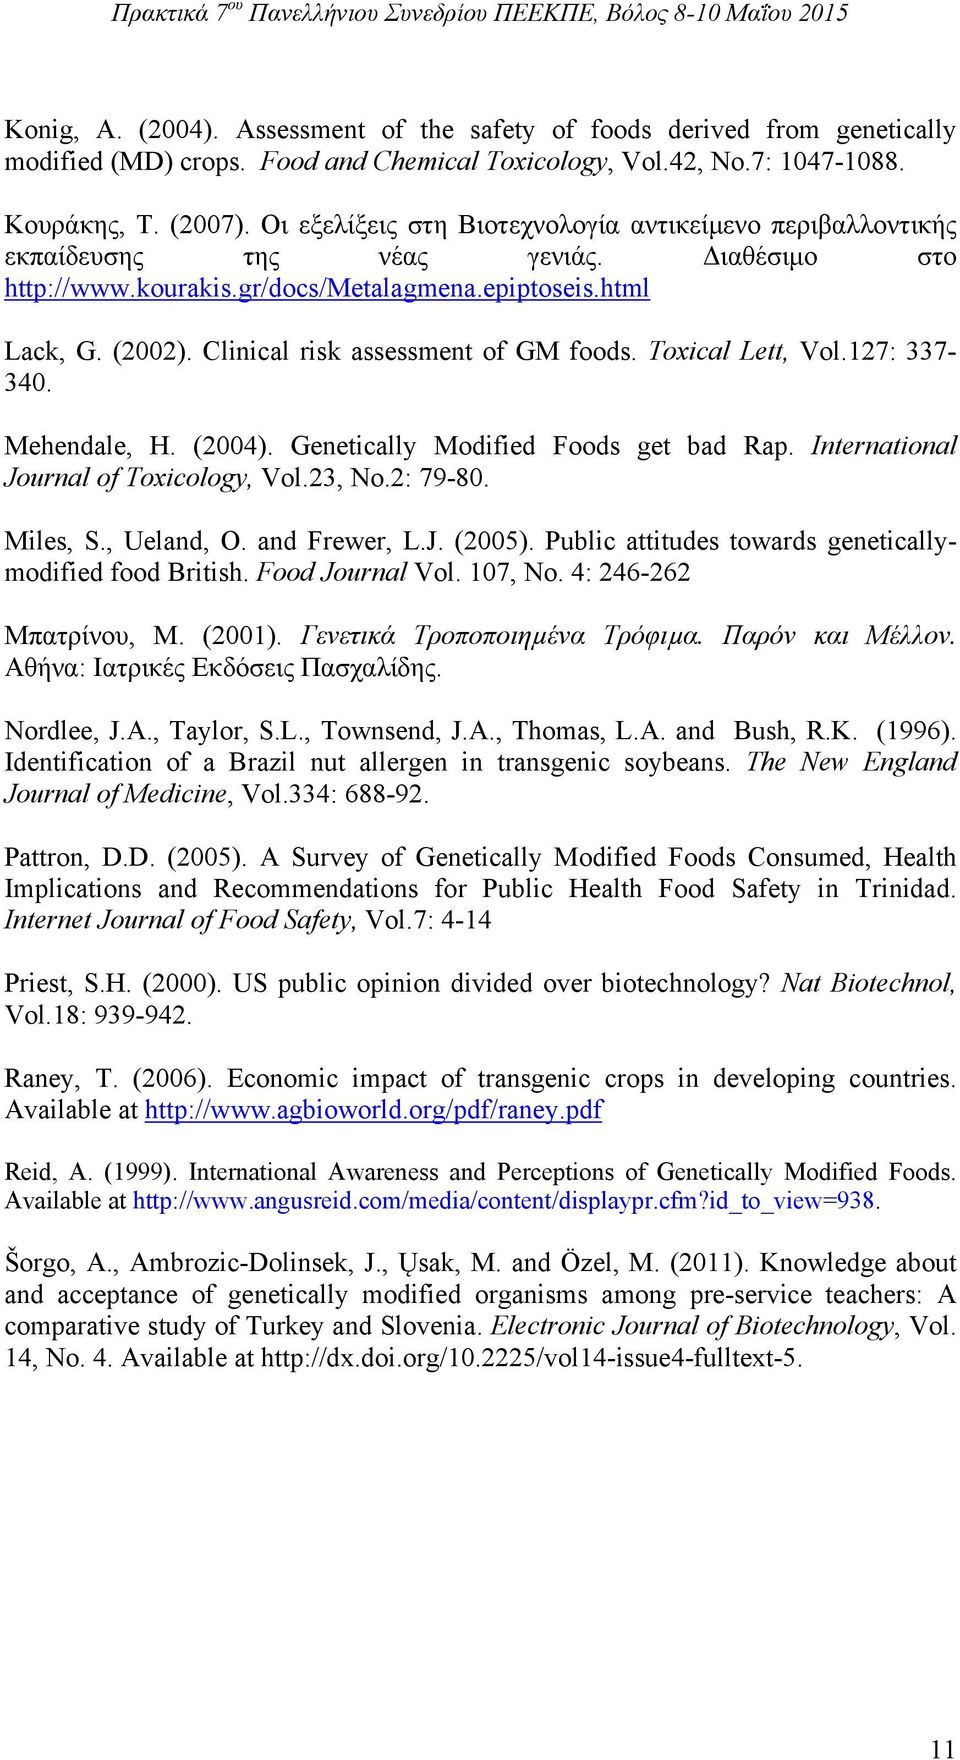 Clinical risk assessment of GM foods. Toxical Lett, Vol.127: 337-340. Mehendale, H. (2004). Genetically Modified Foods get bad Rap. International Journal of Toxicology, Vol.23, No.2: 79-80. Miles, S.